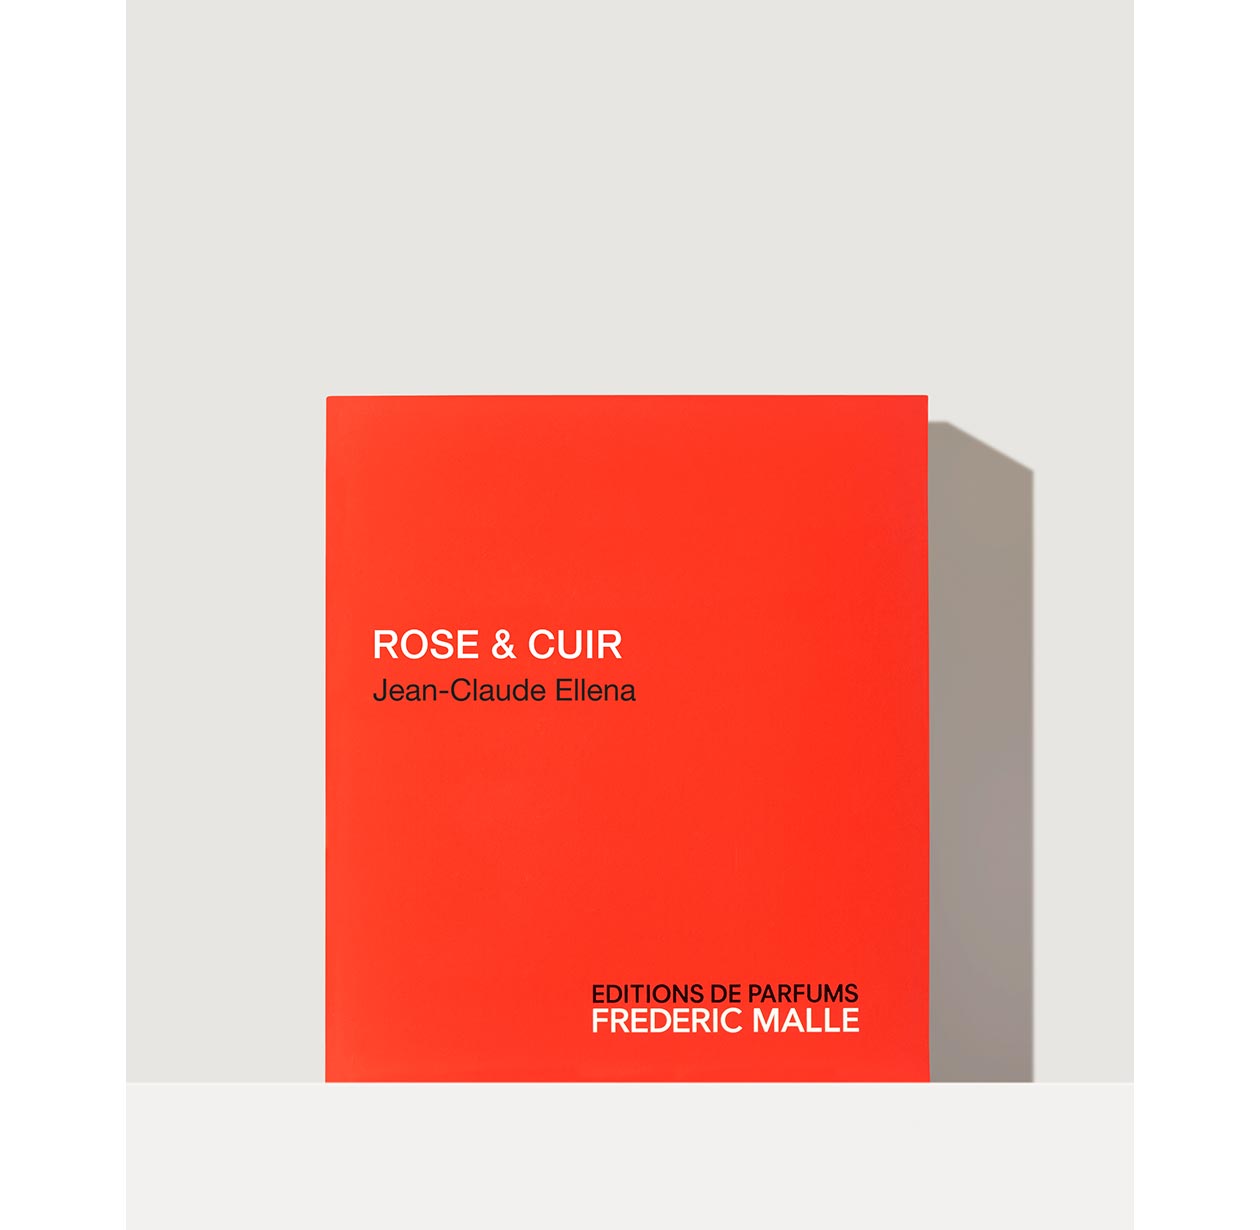 Rose & Cuir by Jean-Claude Ellena | Frederic Malle